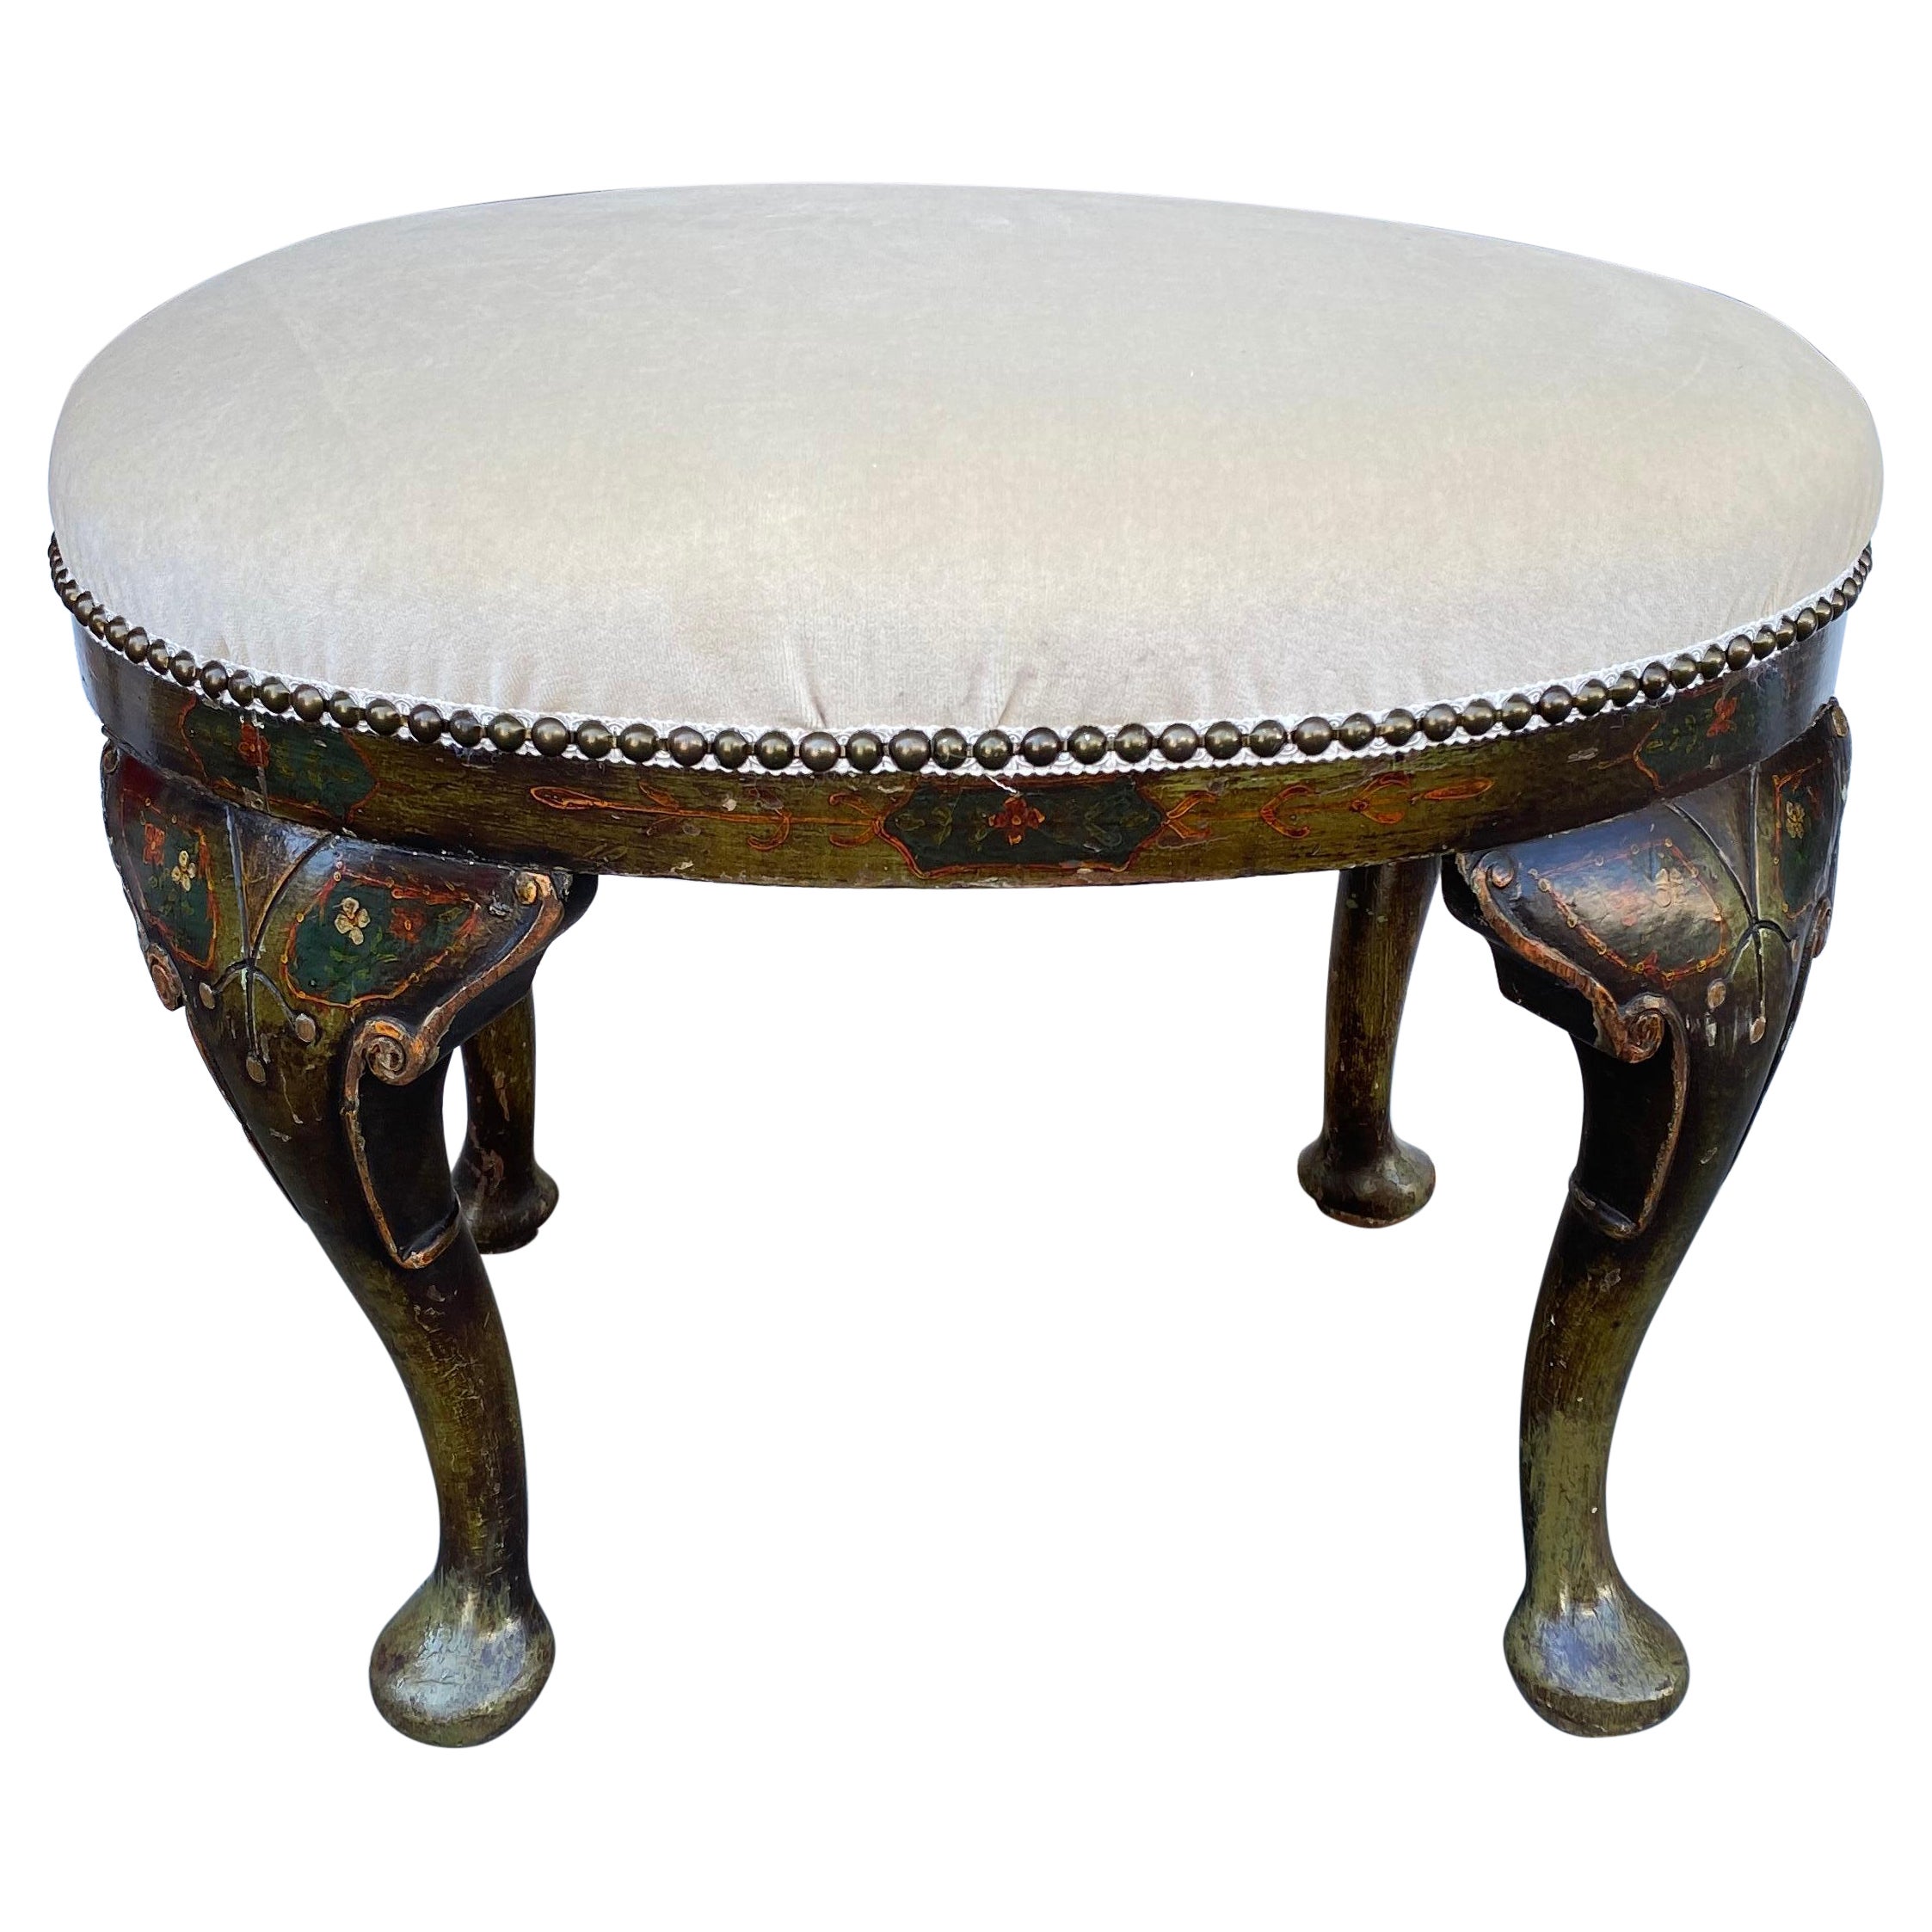 Black Lacquer Chinoiserie Pad Foot, Oval Footstool, English, Late 19th Century For Sale